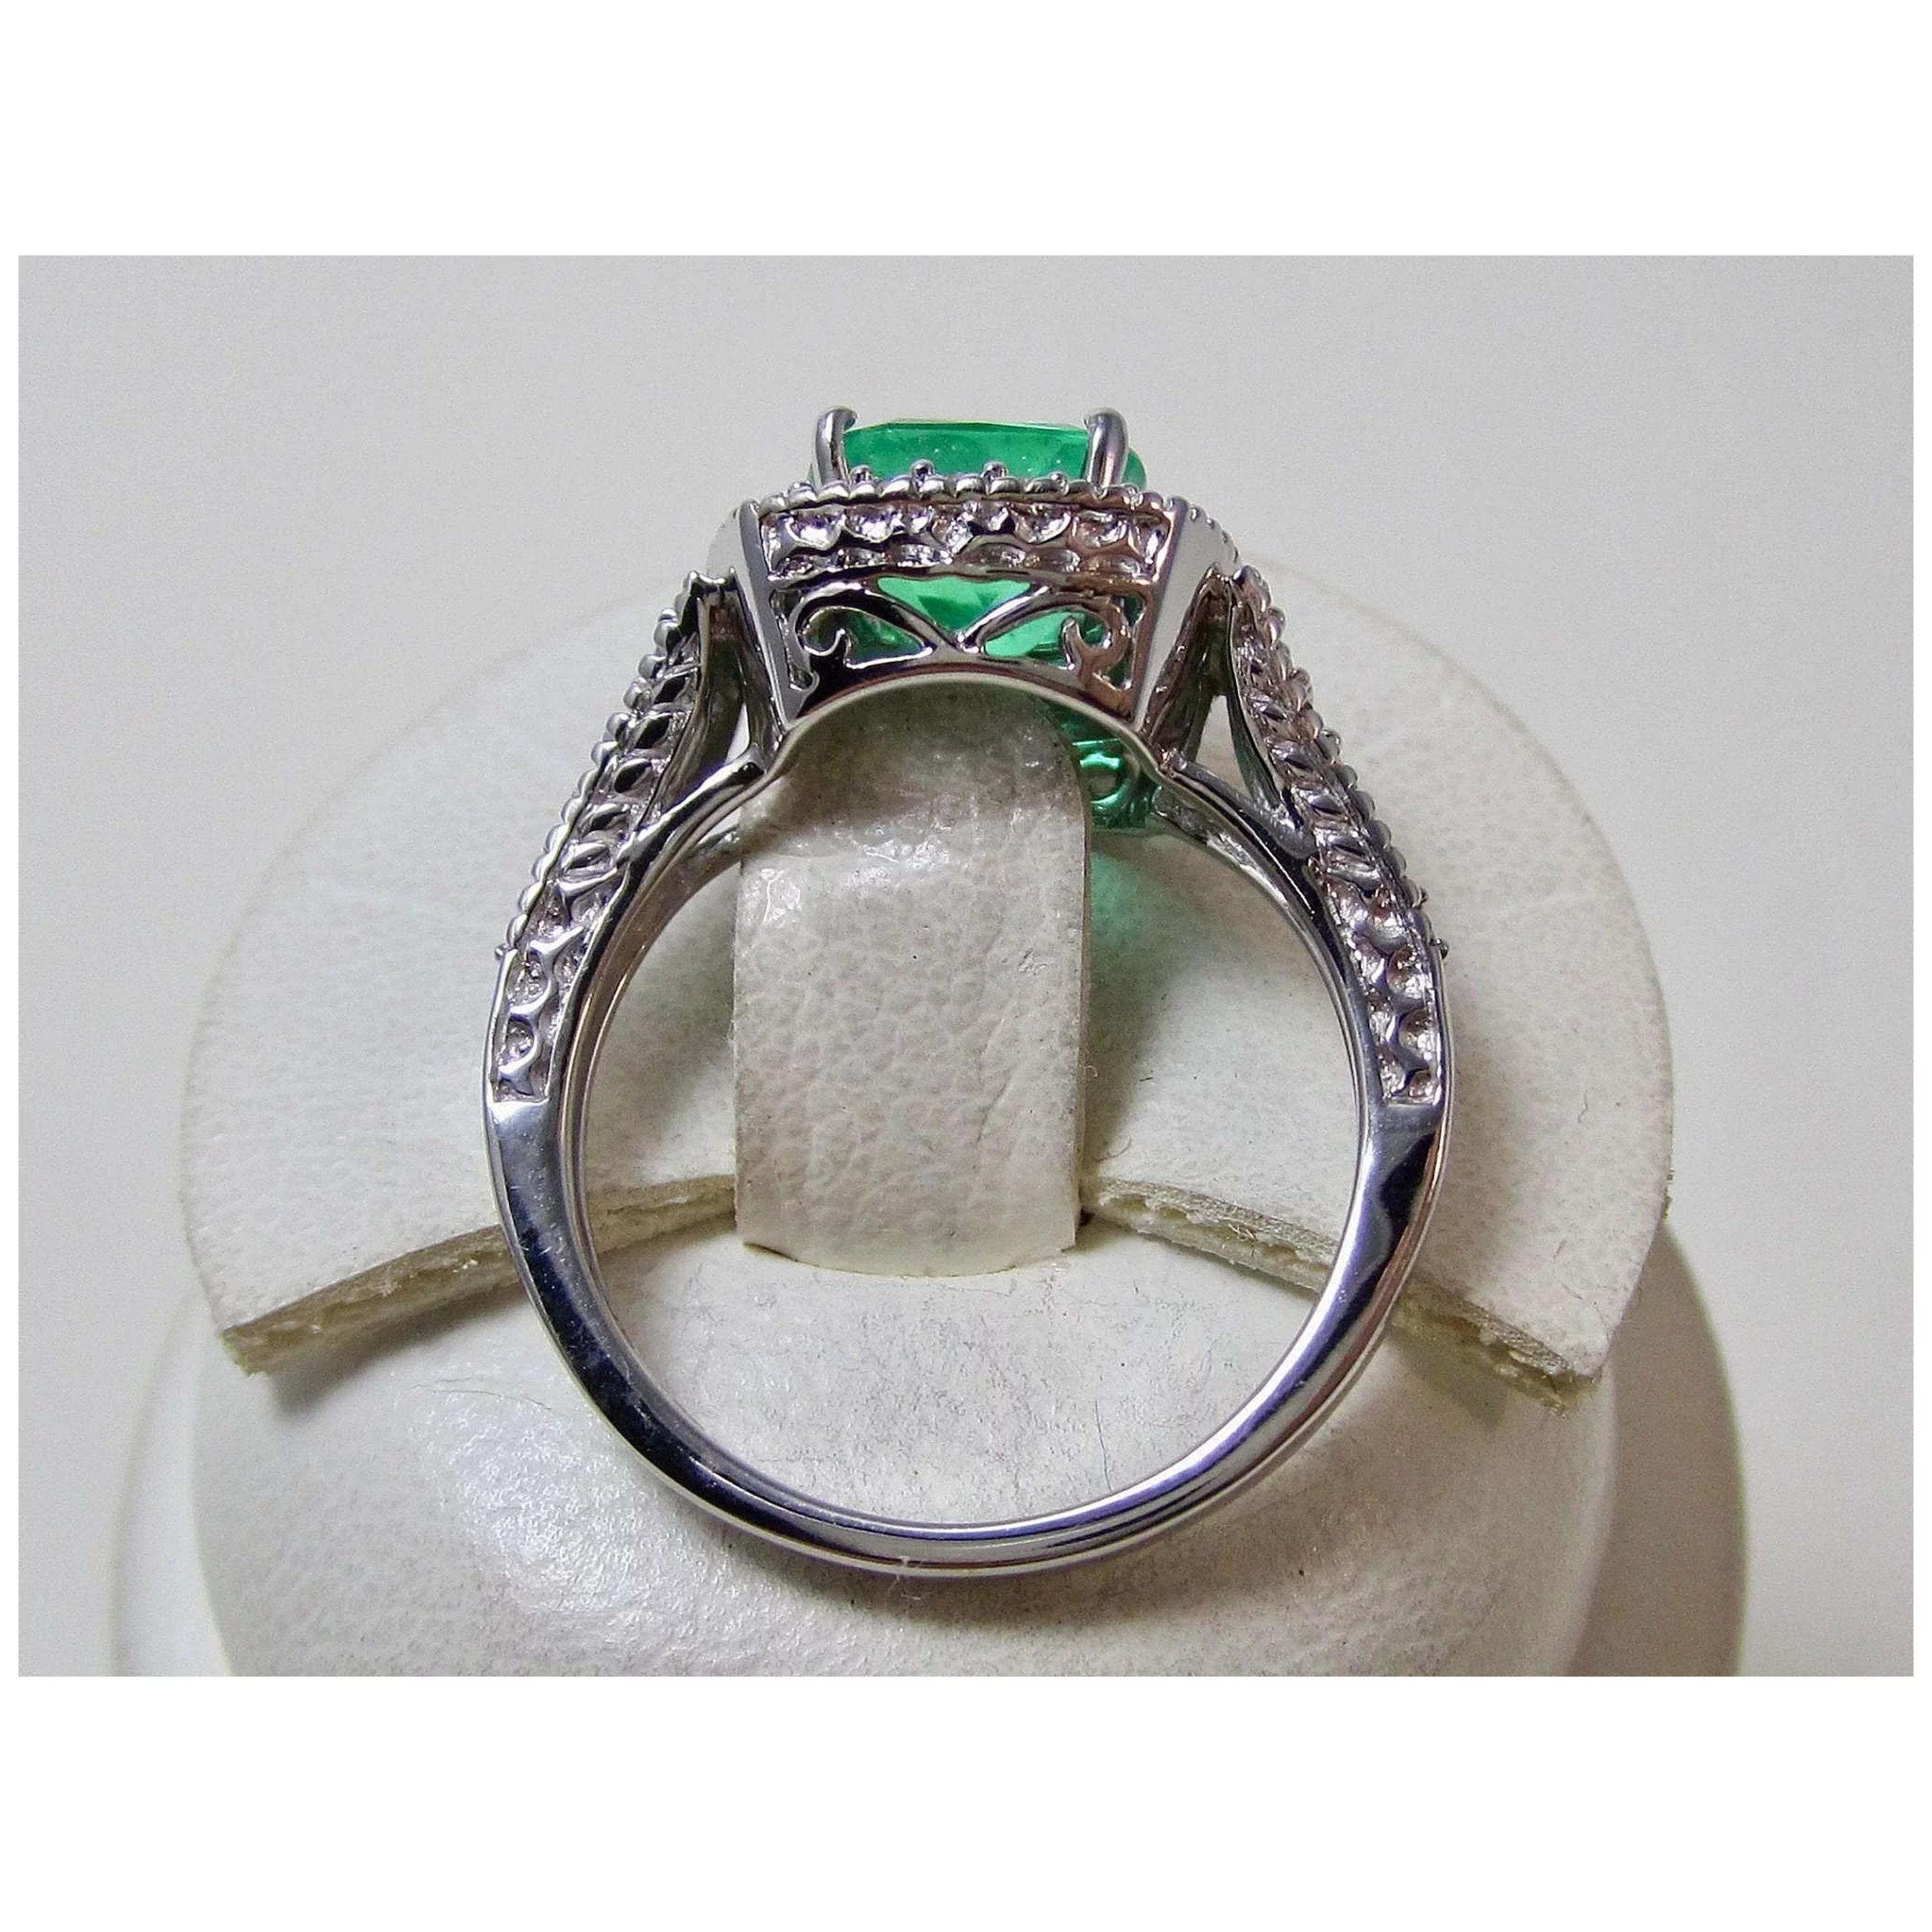 For Sale:  Vintage 3 CT Certified Natural Emerald Diamond Engagement Band Ring in 18K Gold 3